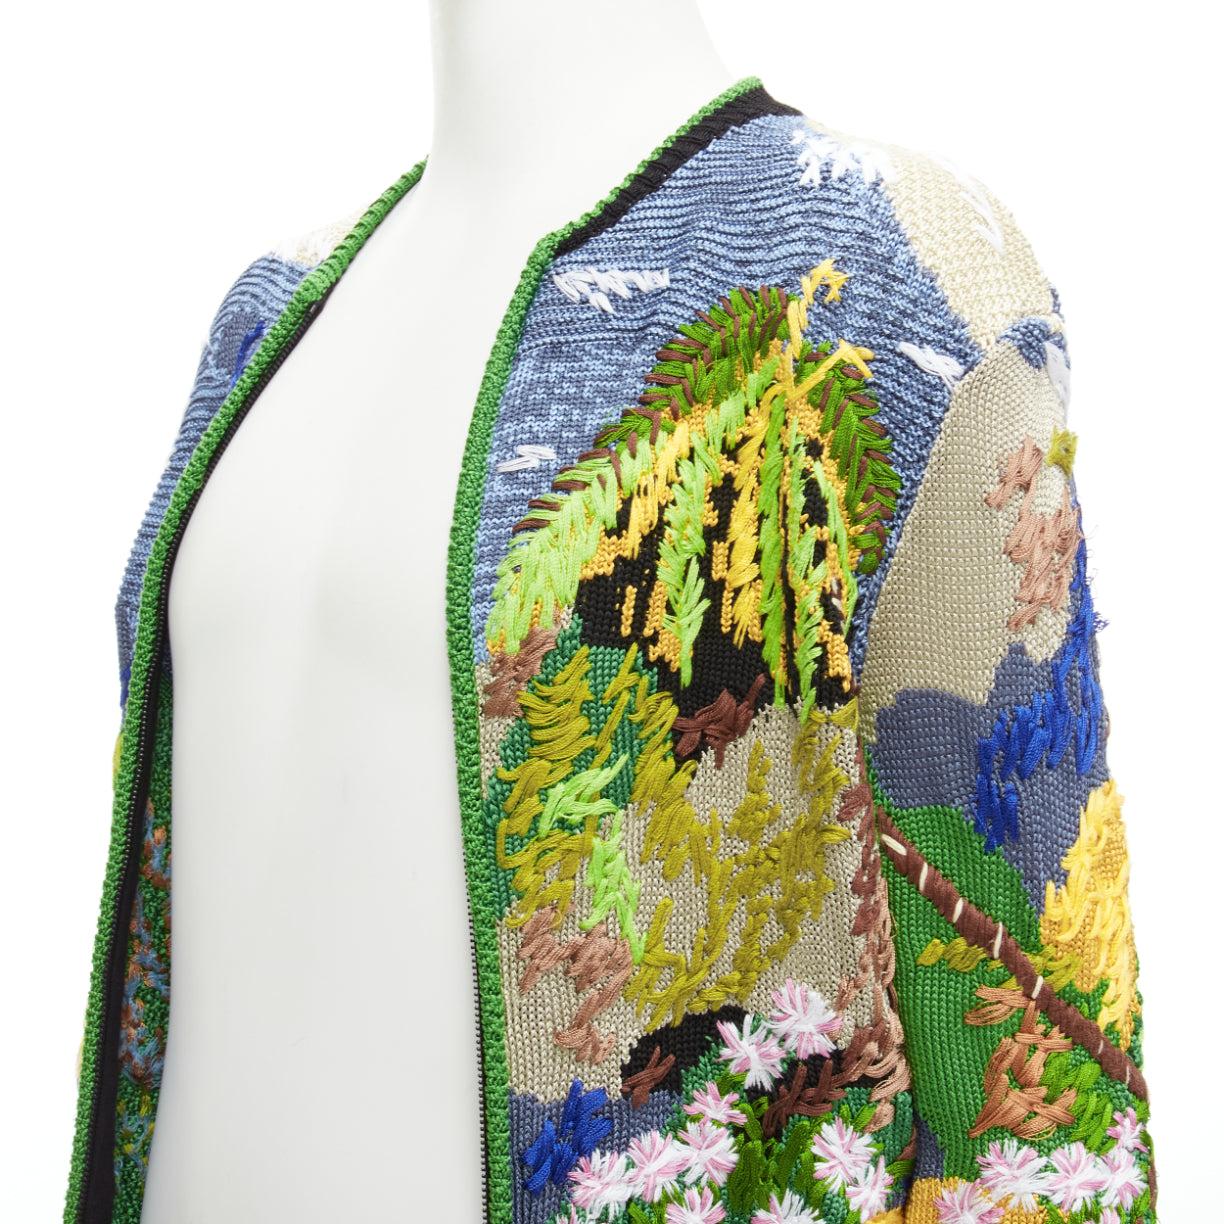 rare SAINT LAURENT 2021 Runway Teddy tropical landscape intarsia cardigan XS
Reference: TGAS/D00745
Brand: Saint Laurent
Designer: Anthony Vaccarello
Collection: Spring Summer 2021 - Runway
Material: Viscose, Blend
Color: Multicolour
Pattern: